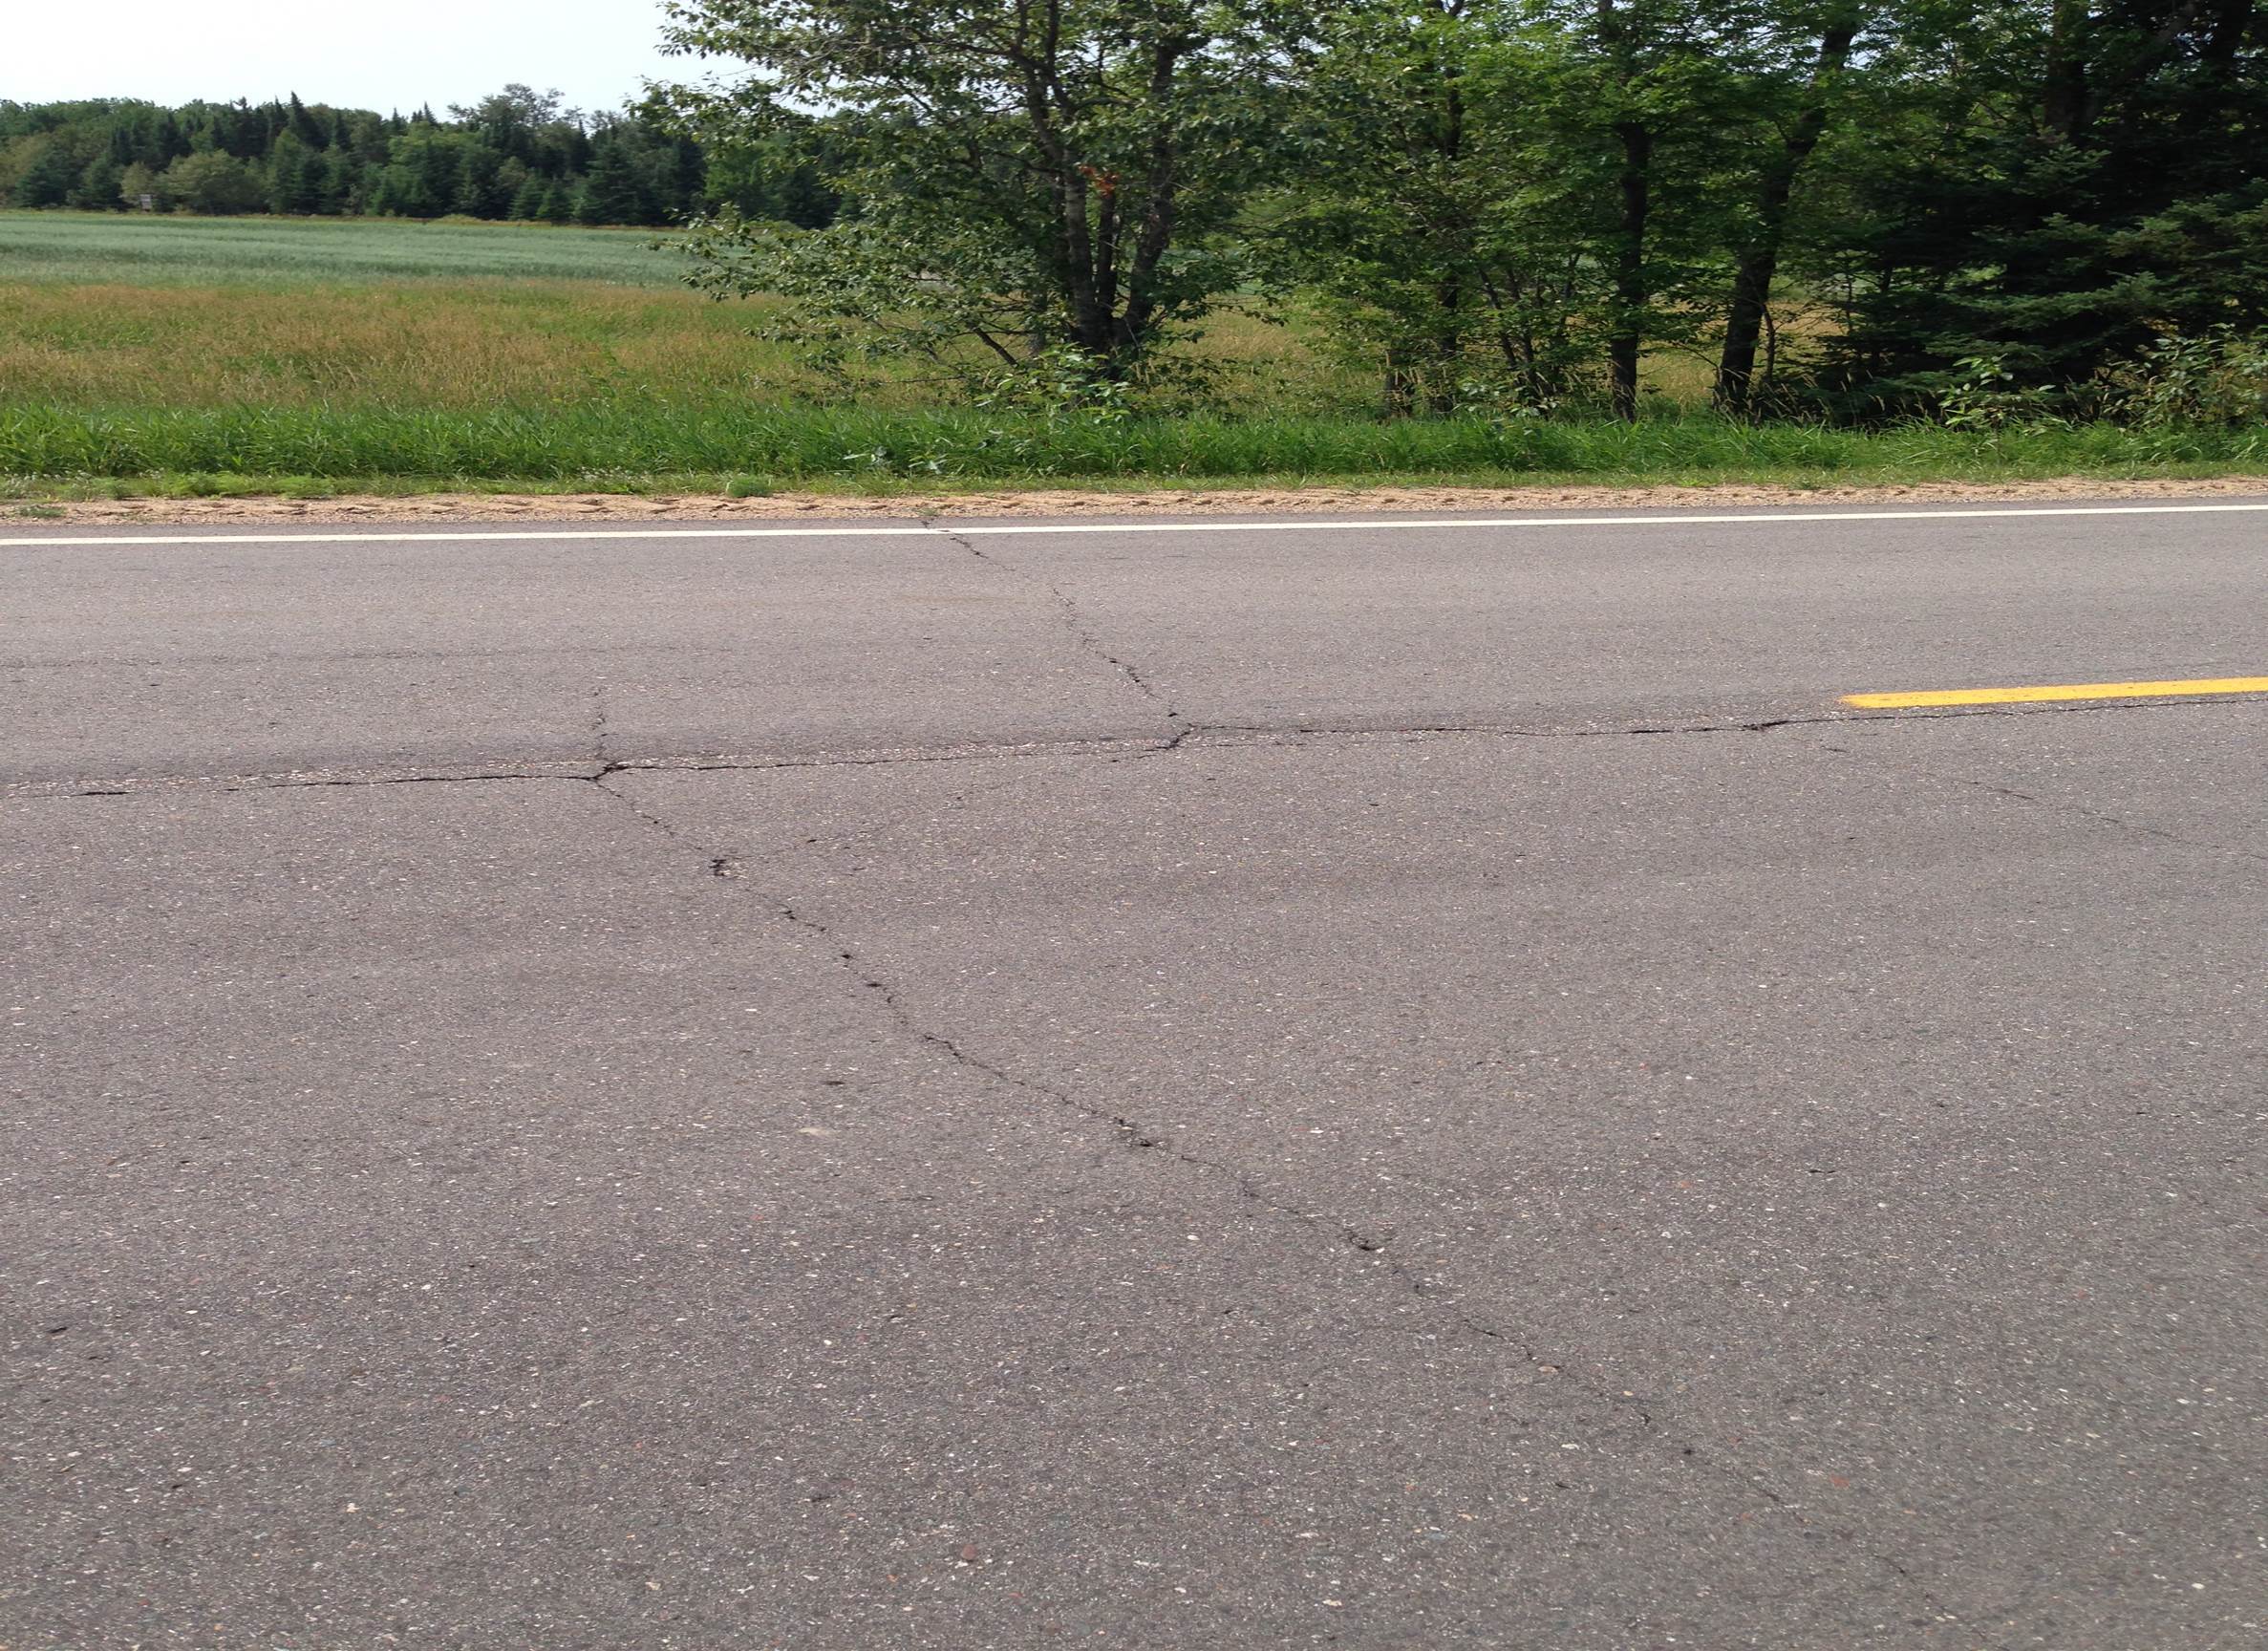 Low-temperature cracks in asphalt pavement can cross entire lanes of traffic.